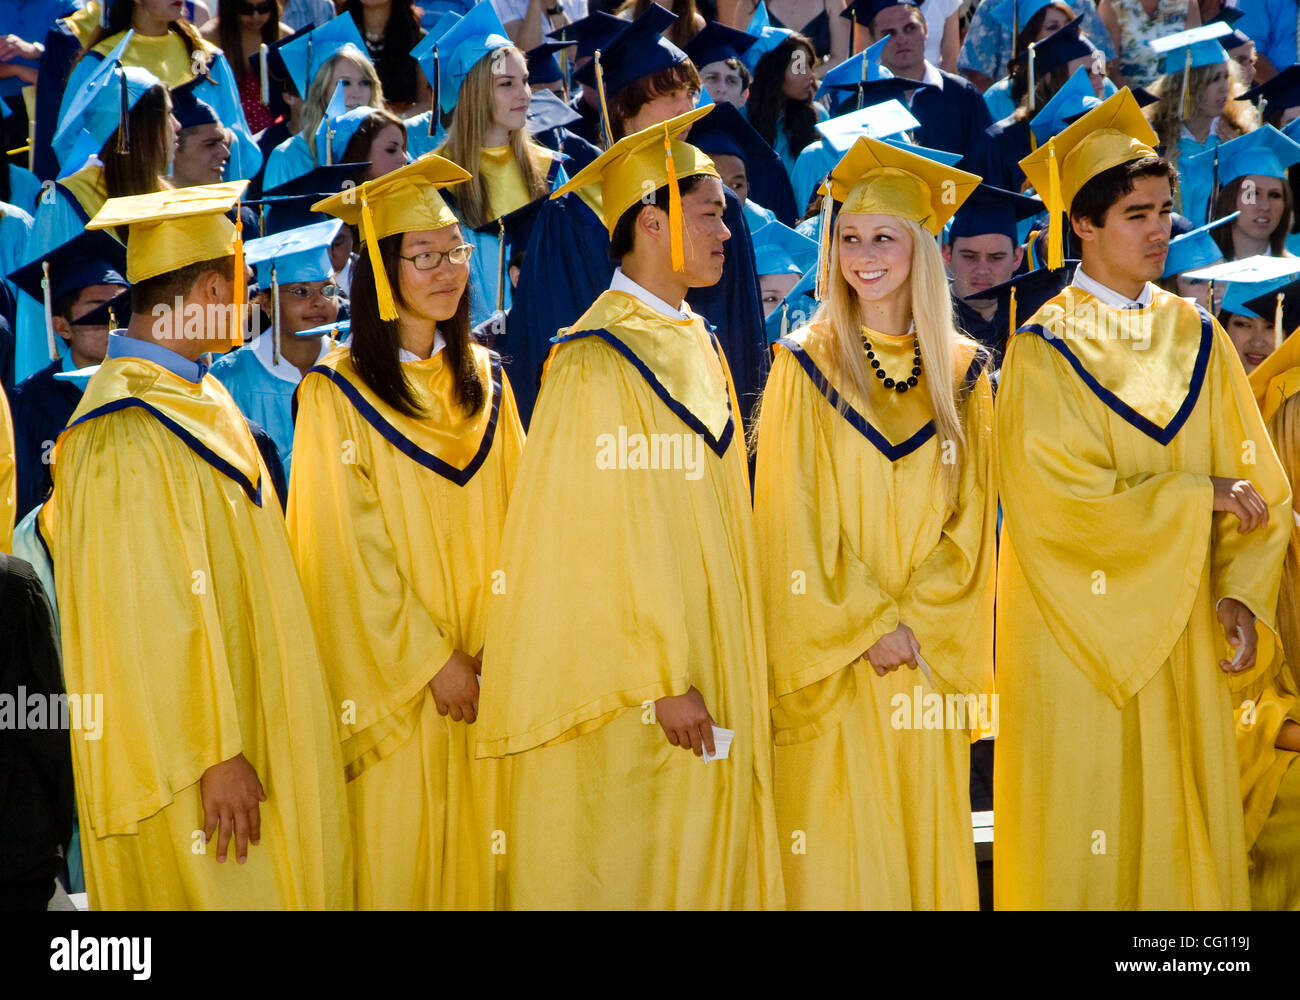 Wearing Caps And Gowns, High School Seniors Participate In ...